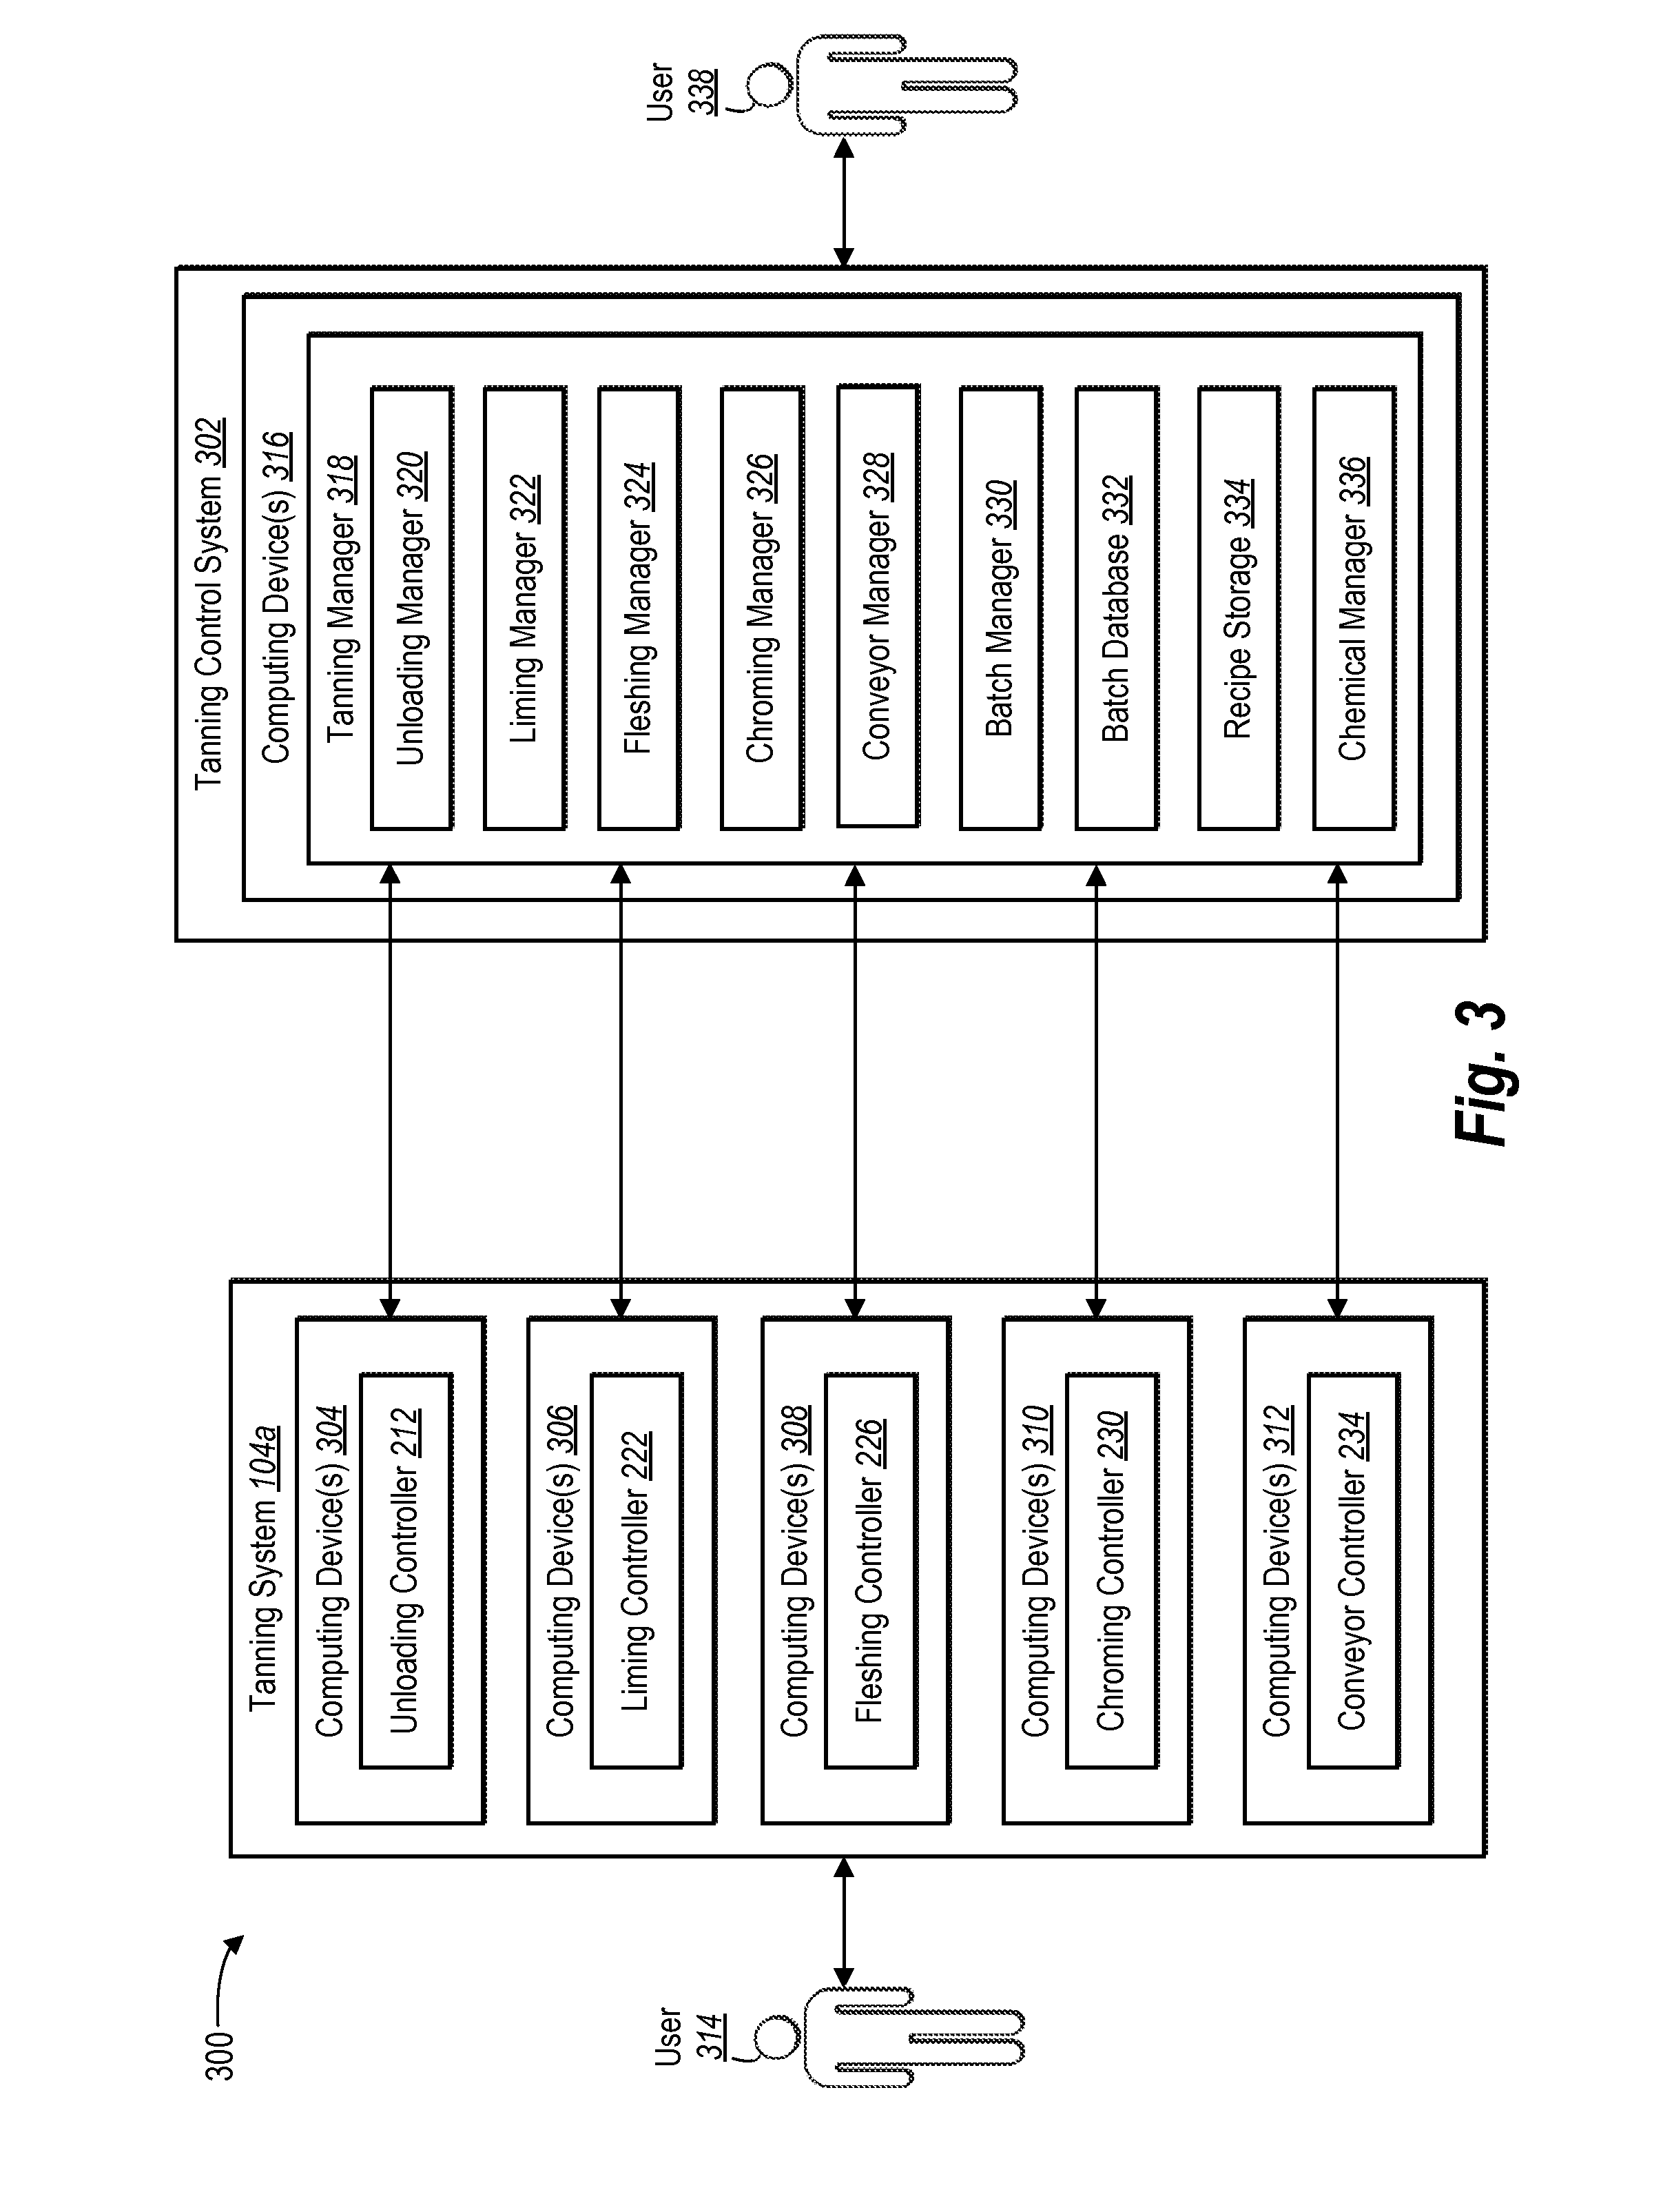 Hide routing systems and methods